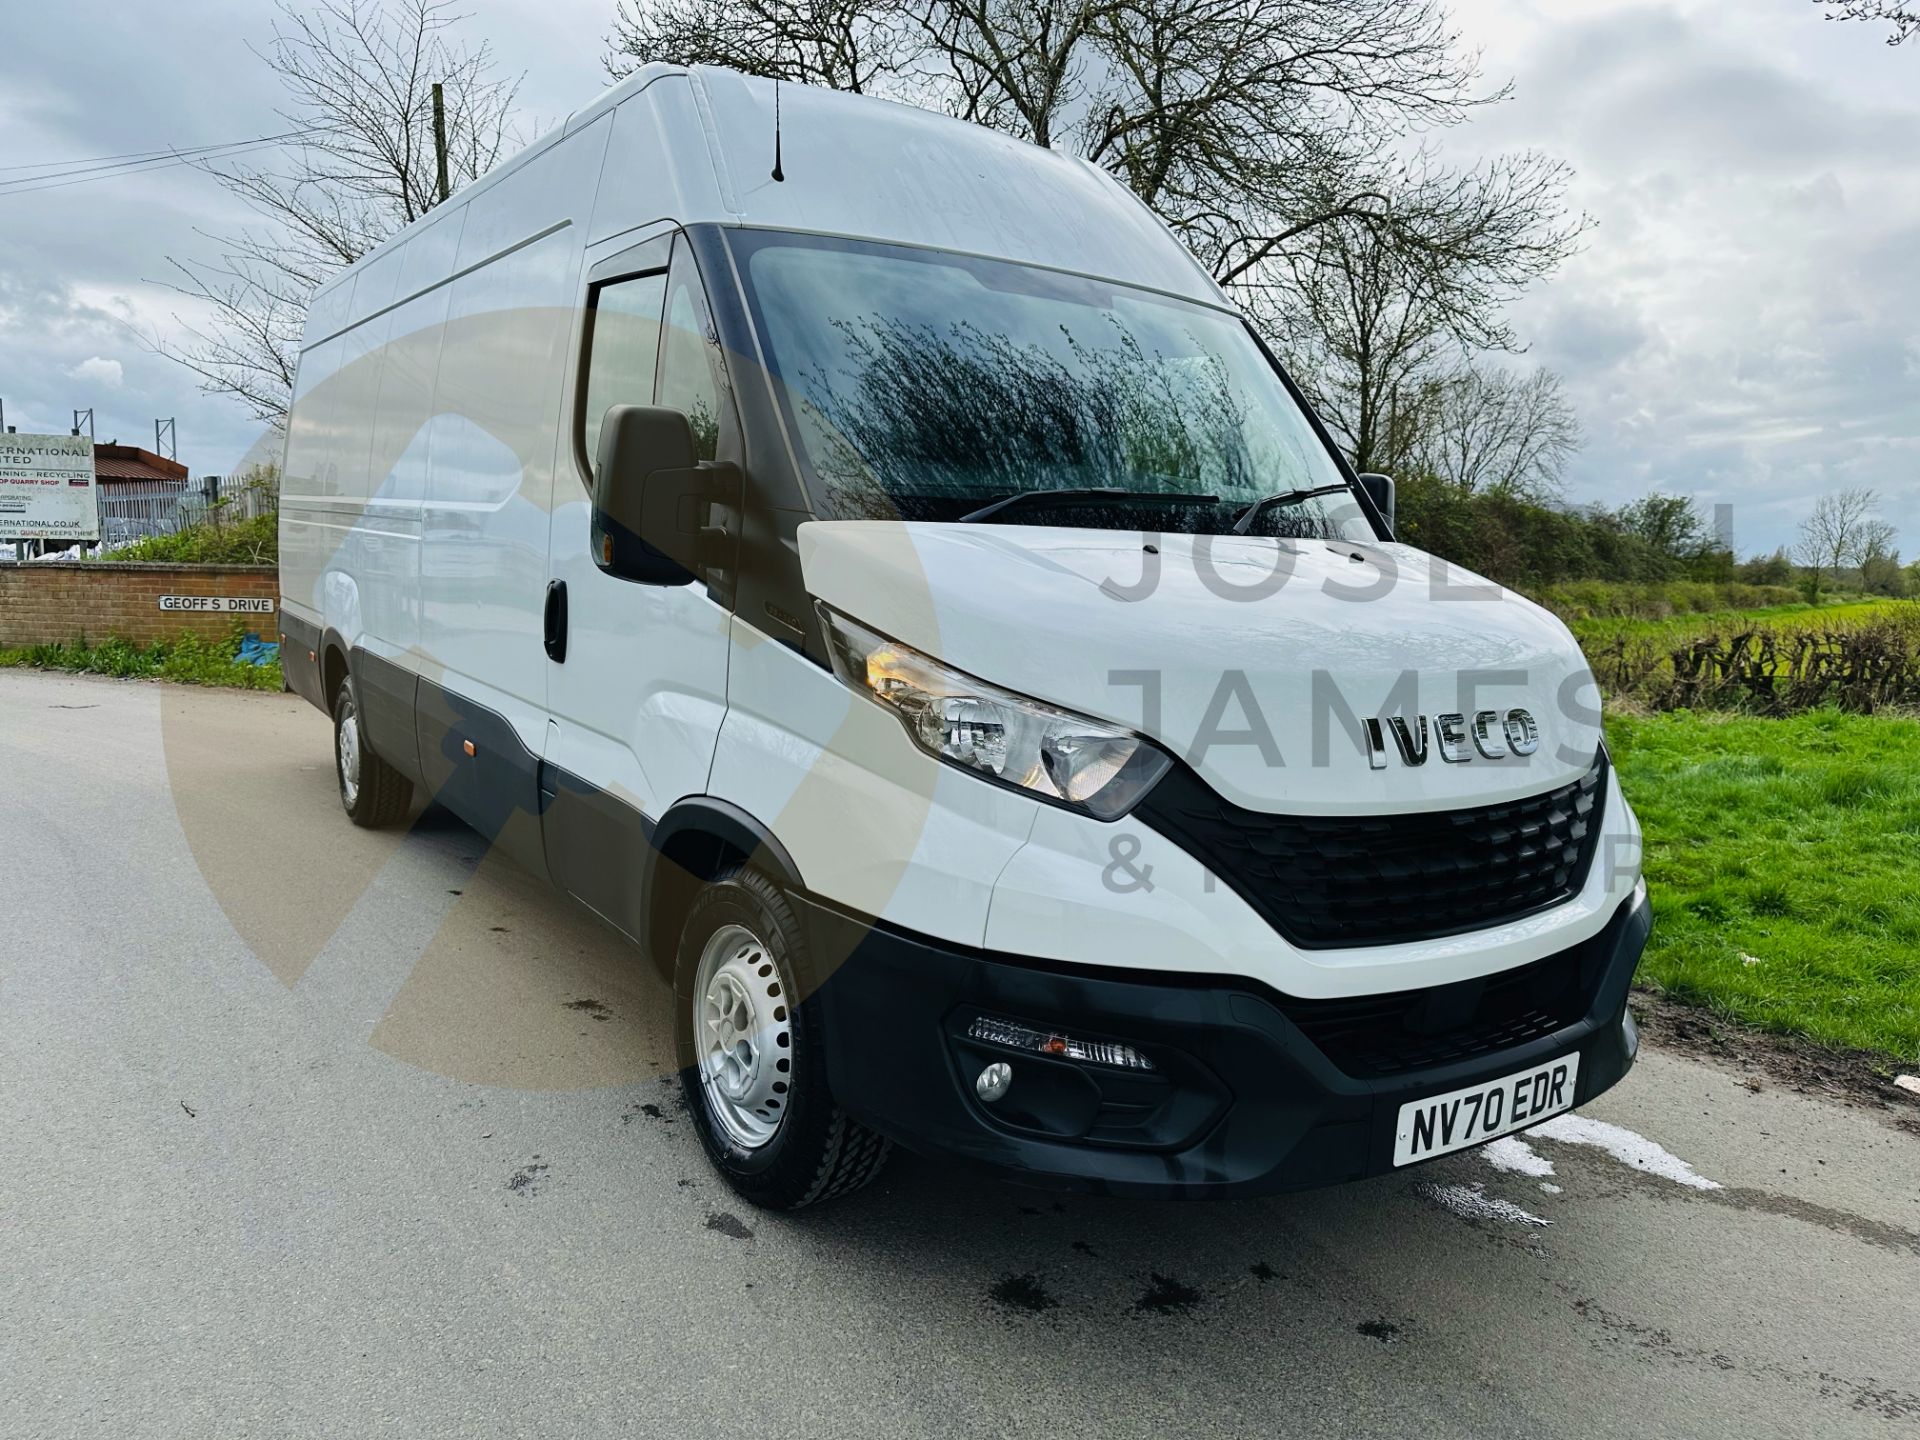 IVECO DAILY 35-140 LONG WHEEL BASE HIFG ROOF - 2021 REG (NEW SHAPE) ONLY 85K MILES - AIR CON - LOOK! - Image 2 of 30